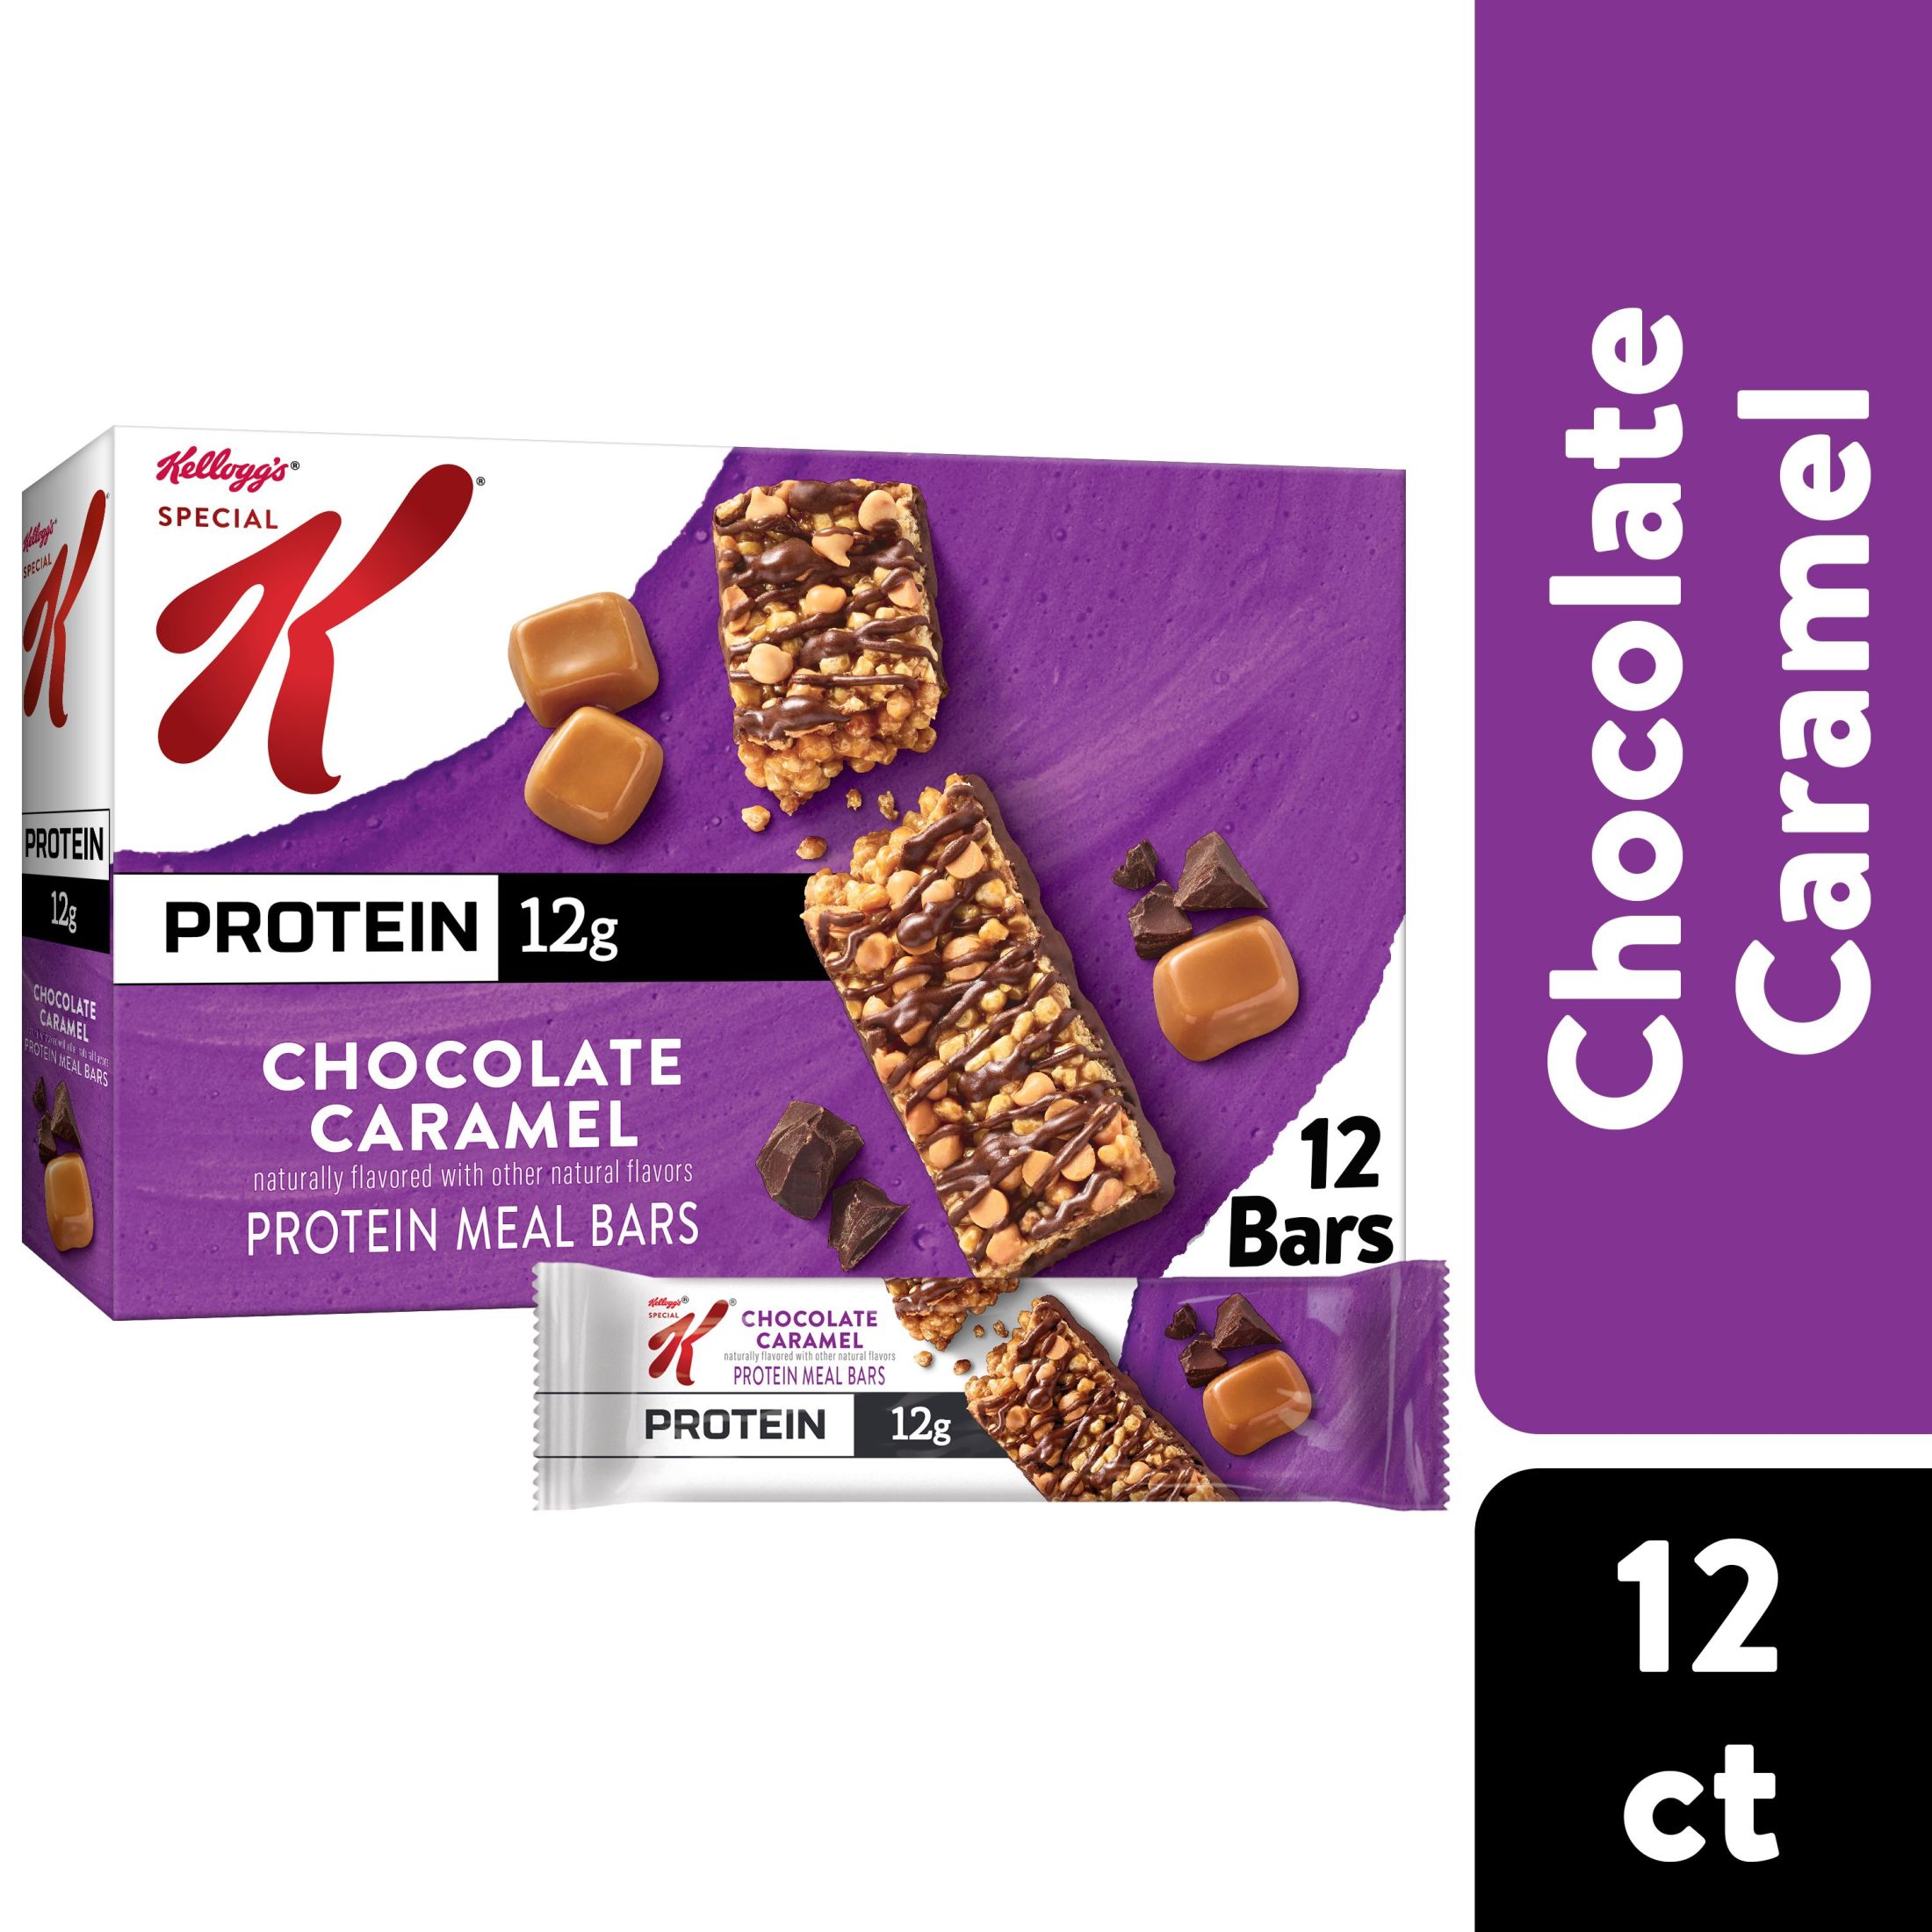 Kellogg's Special K Chocolate Caramel Chewy Protein Meal Bars, Ready-to-Eat, 19 oz, 12 Count - image 1 of 13